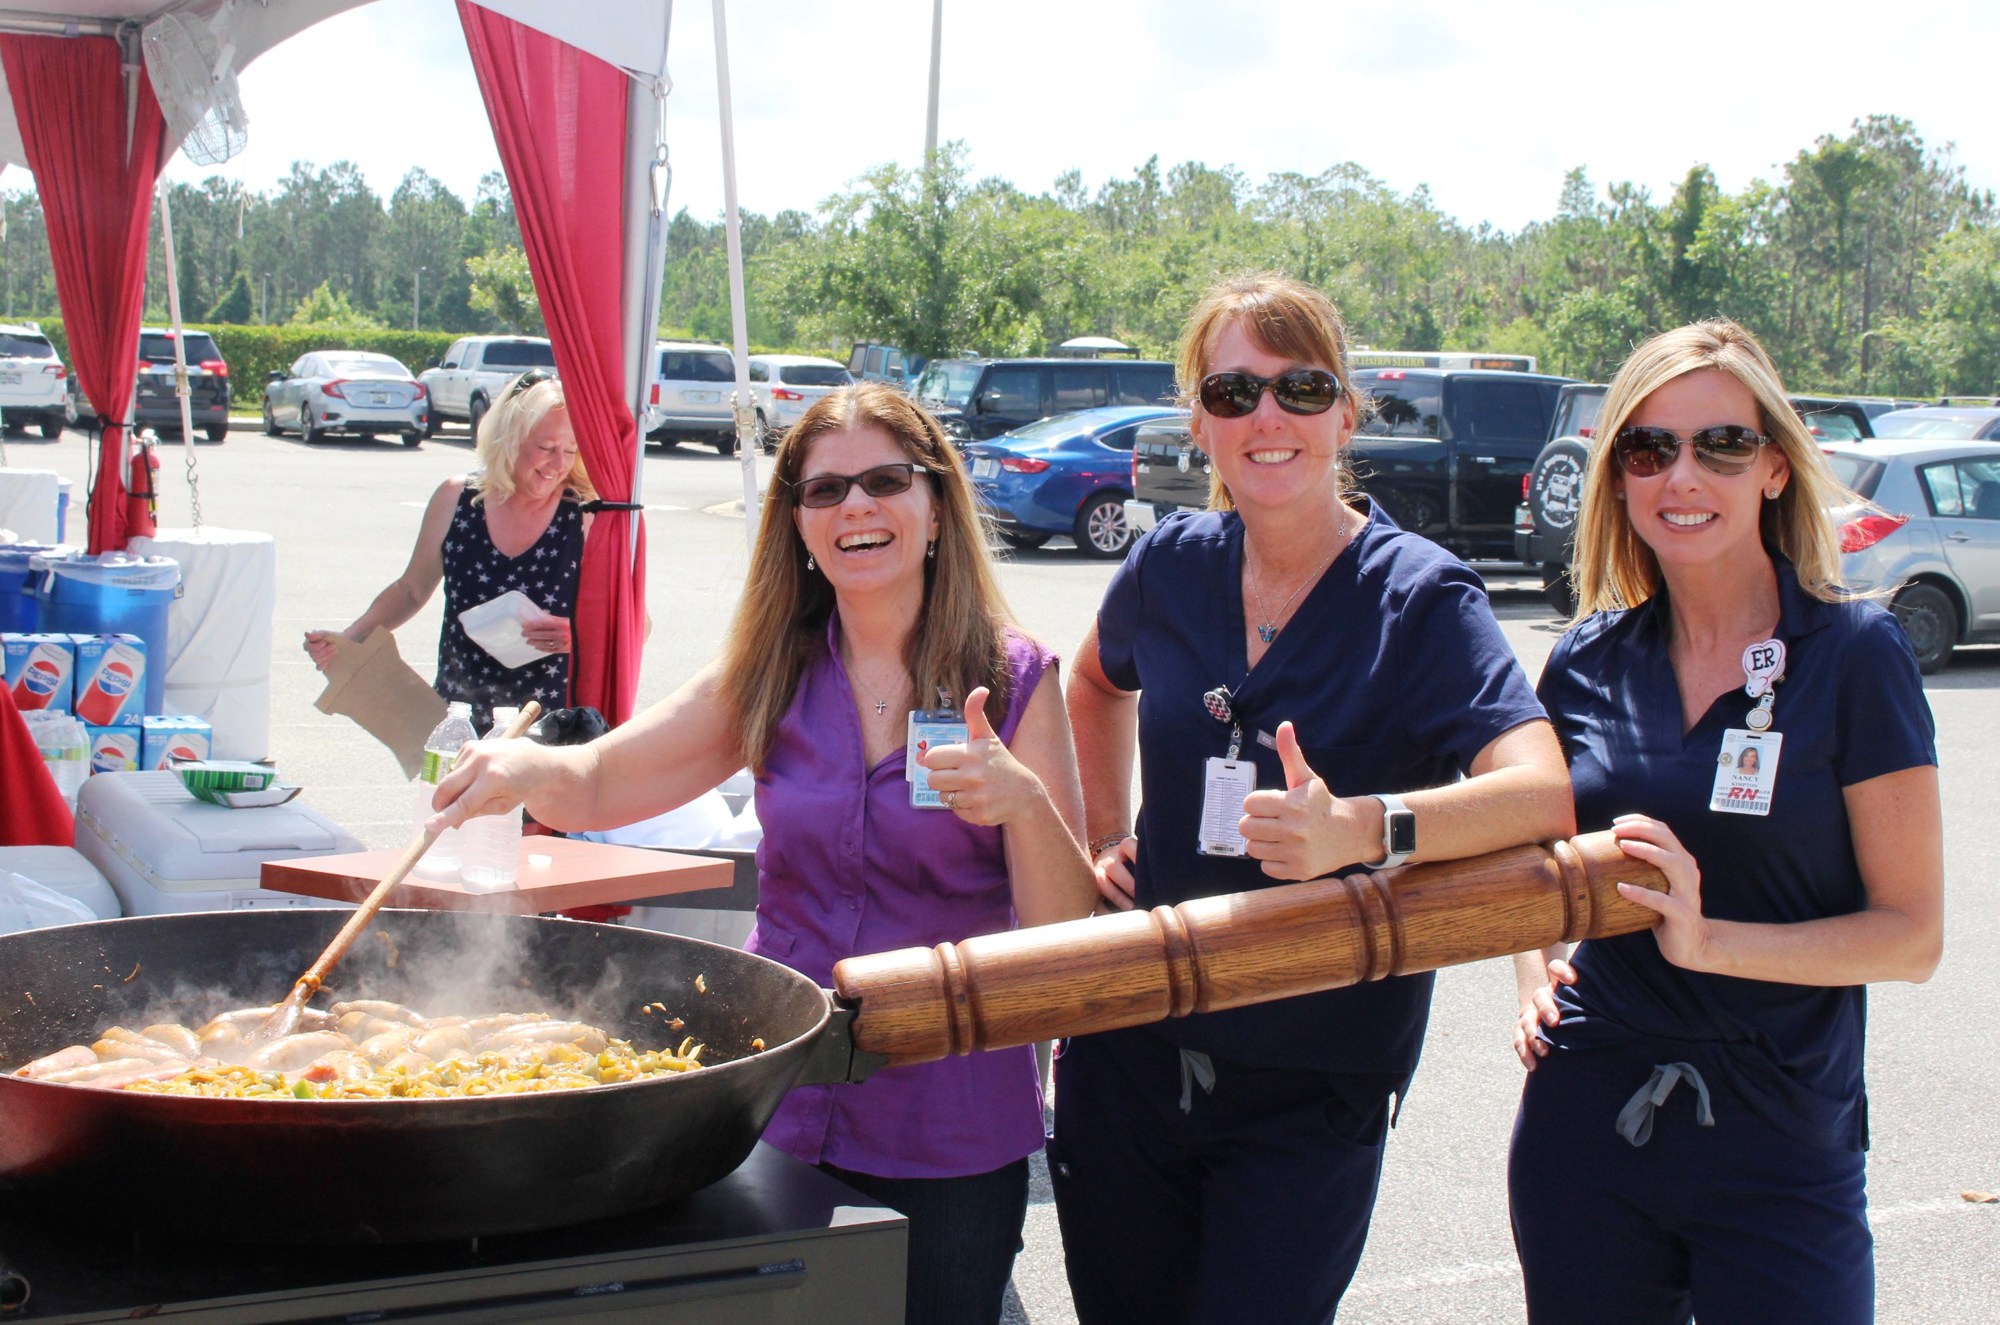 Florida Hospital Memorial Medical Center hosted a free barbecue for emergency responders. Shown are emergency department team members Mary Uanino, Kathleen Krier and Nancy Kimpton helping to prepare the food.